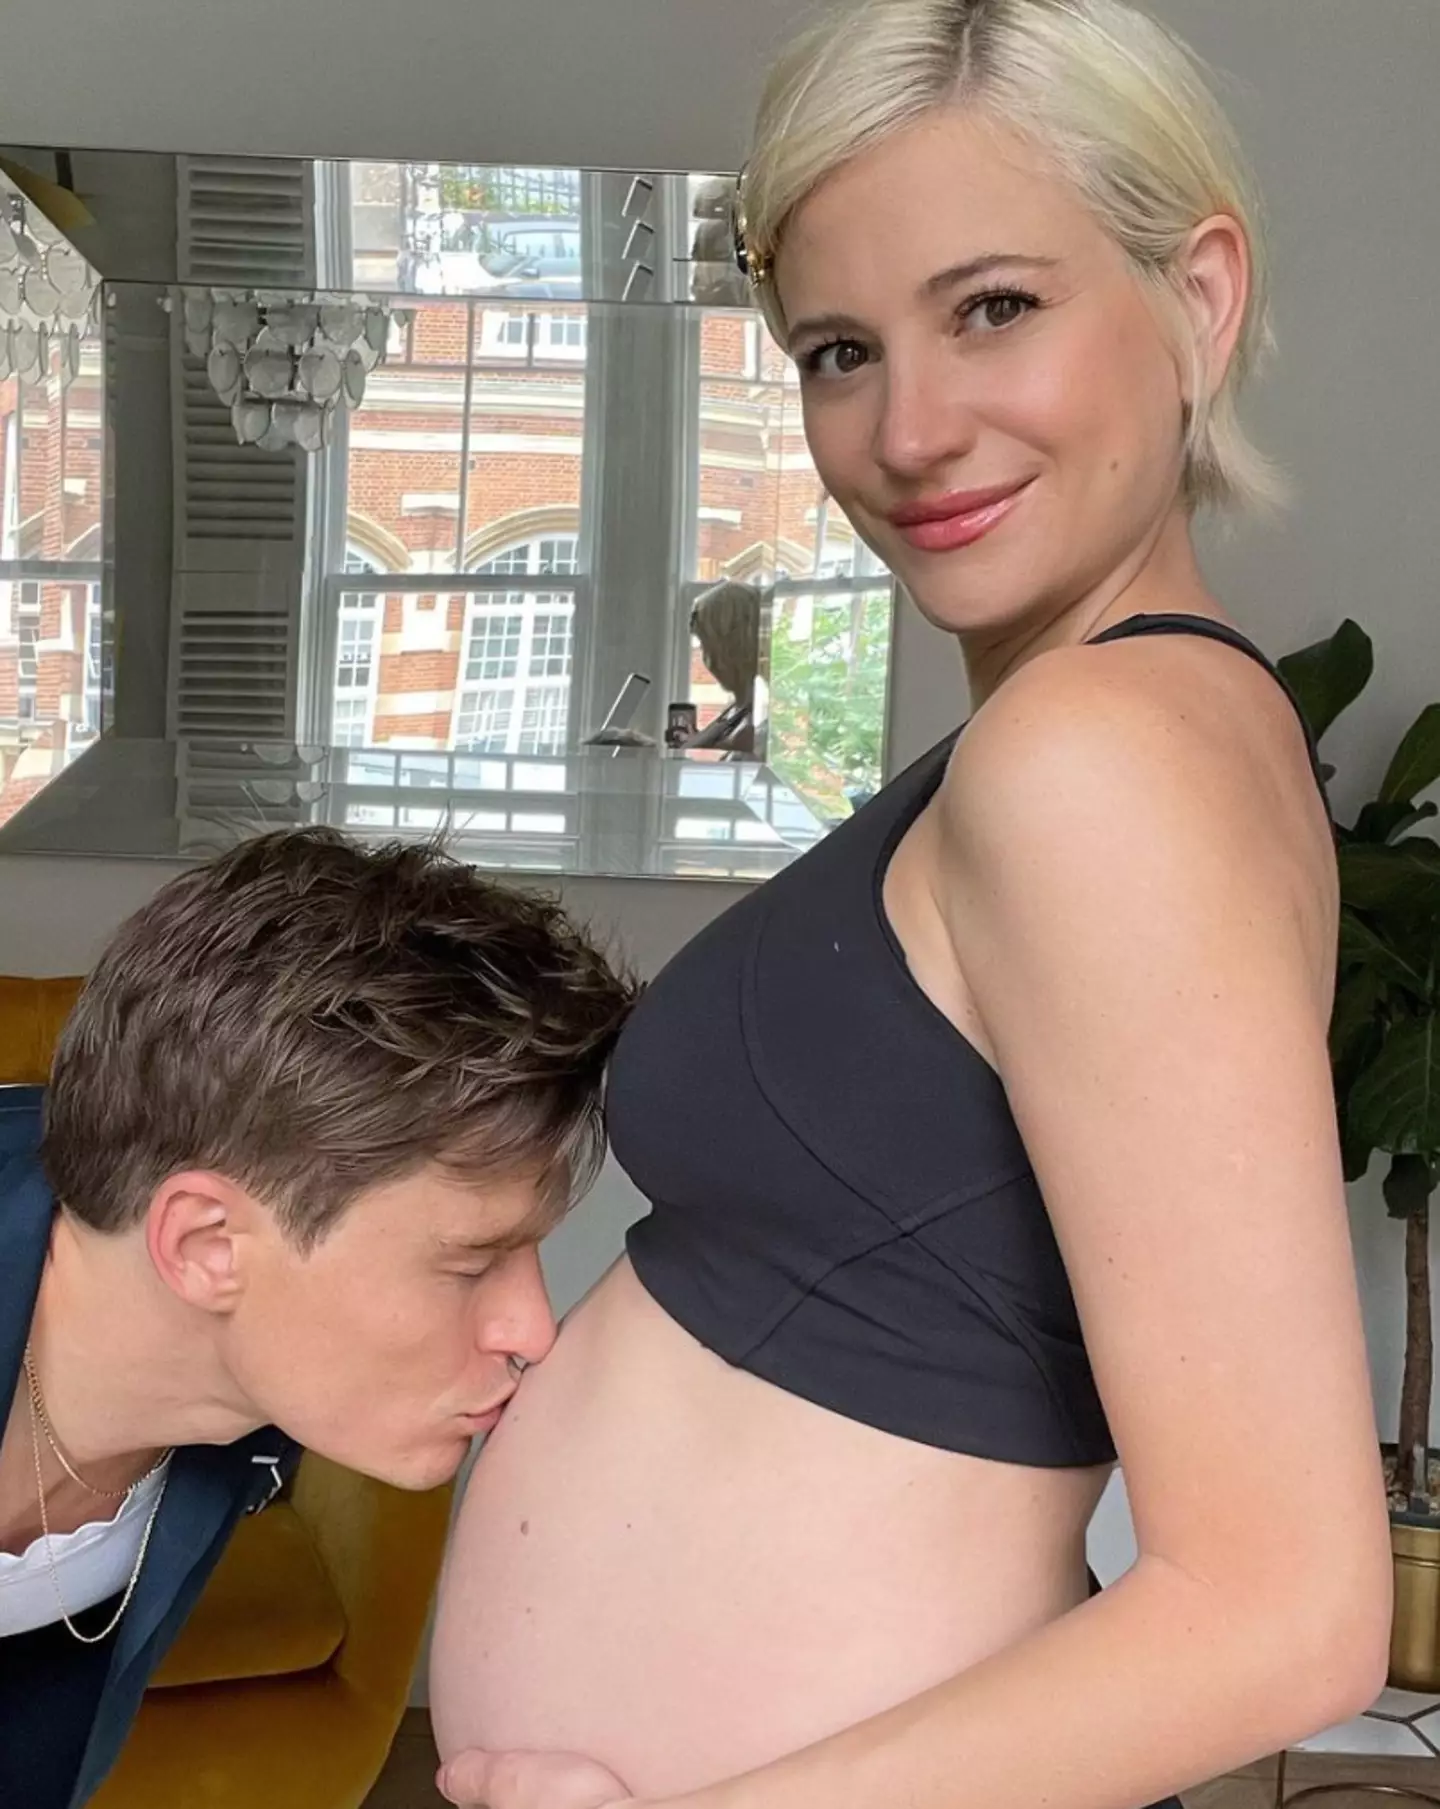 The singer showed off her growing bump in a series of snaps.